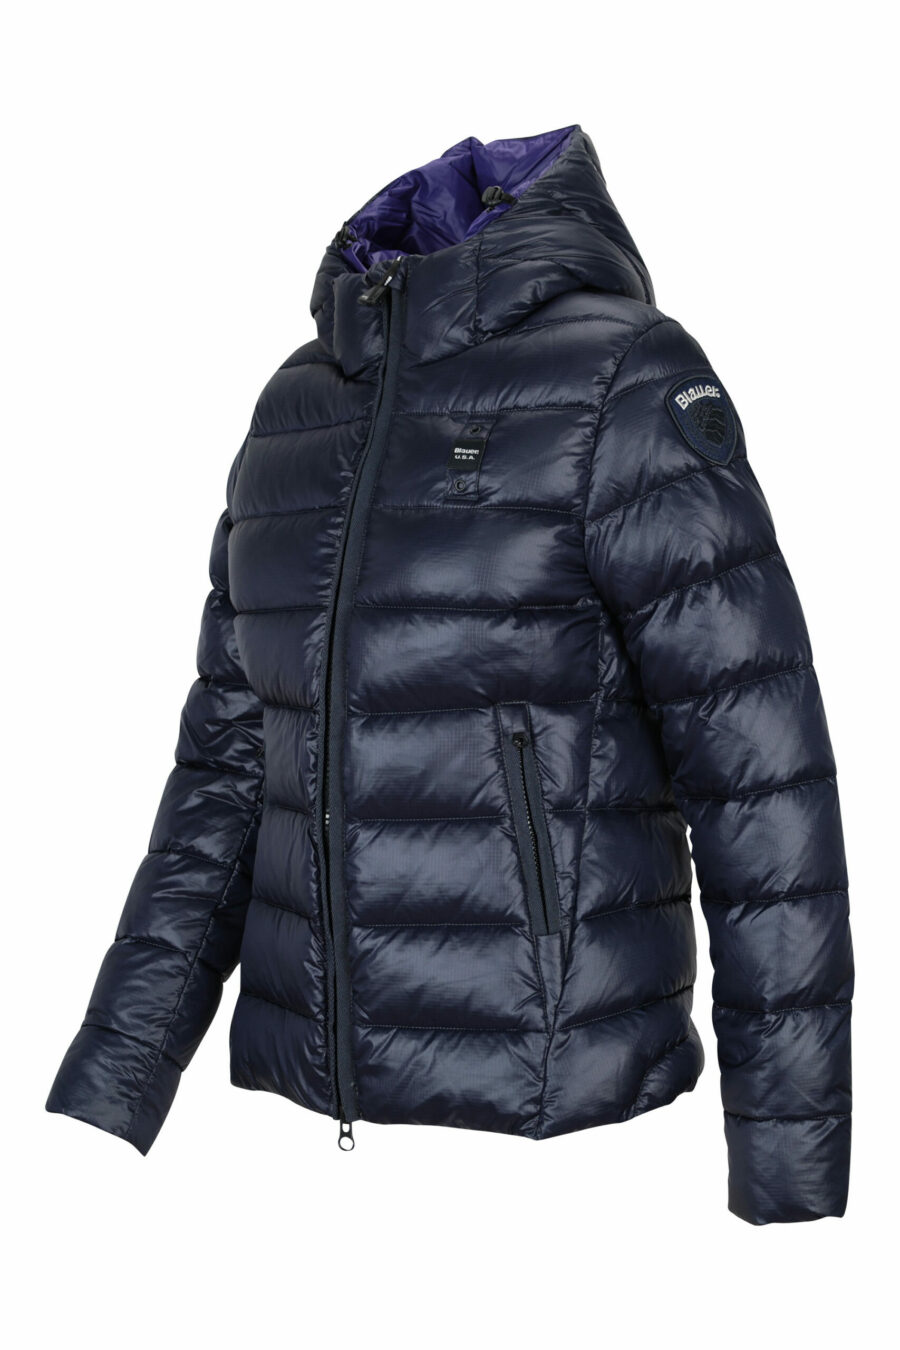 Blue straight lined hooded jacket with violet inside with logo patch - 8058610644932 3 scaled